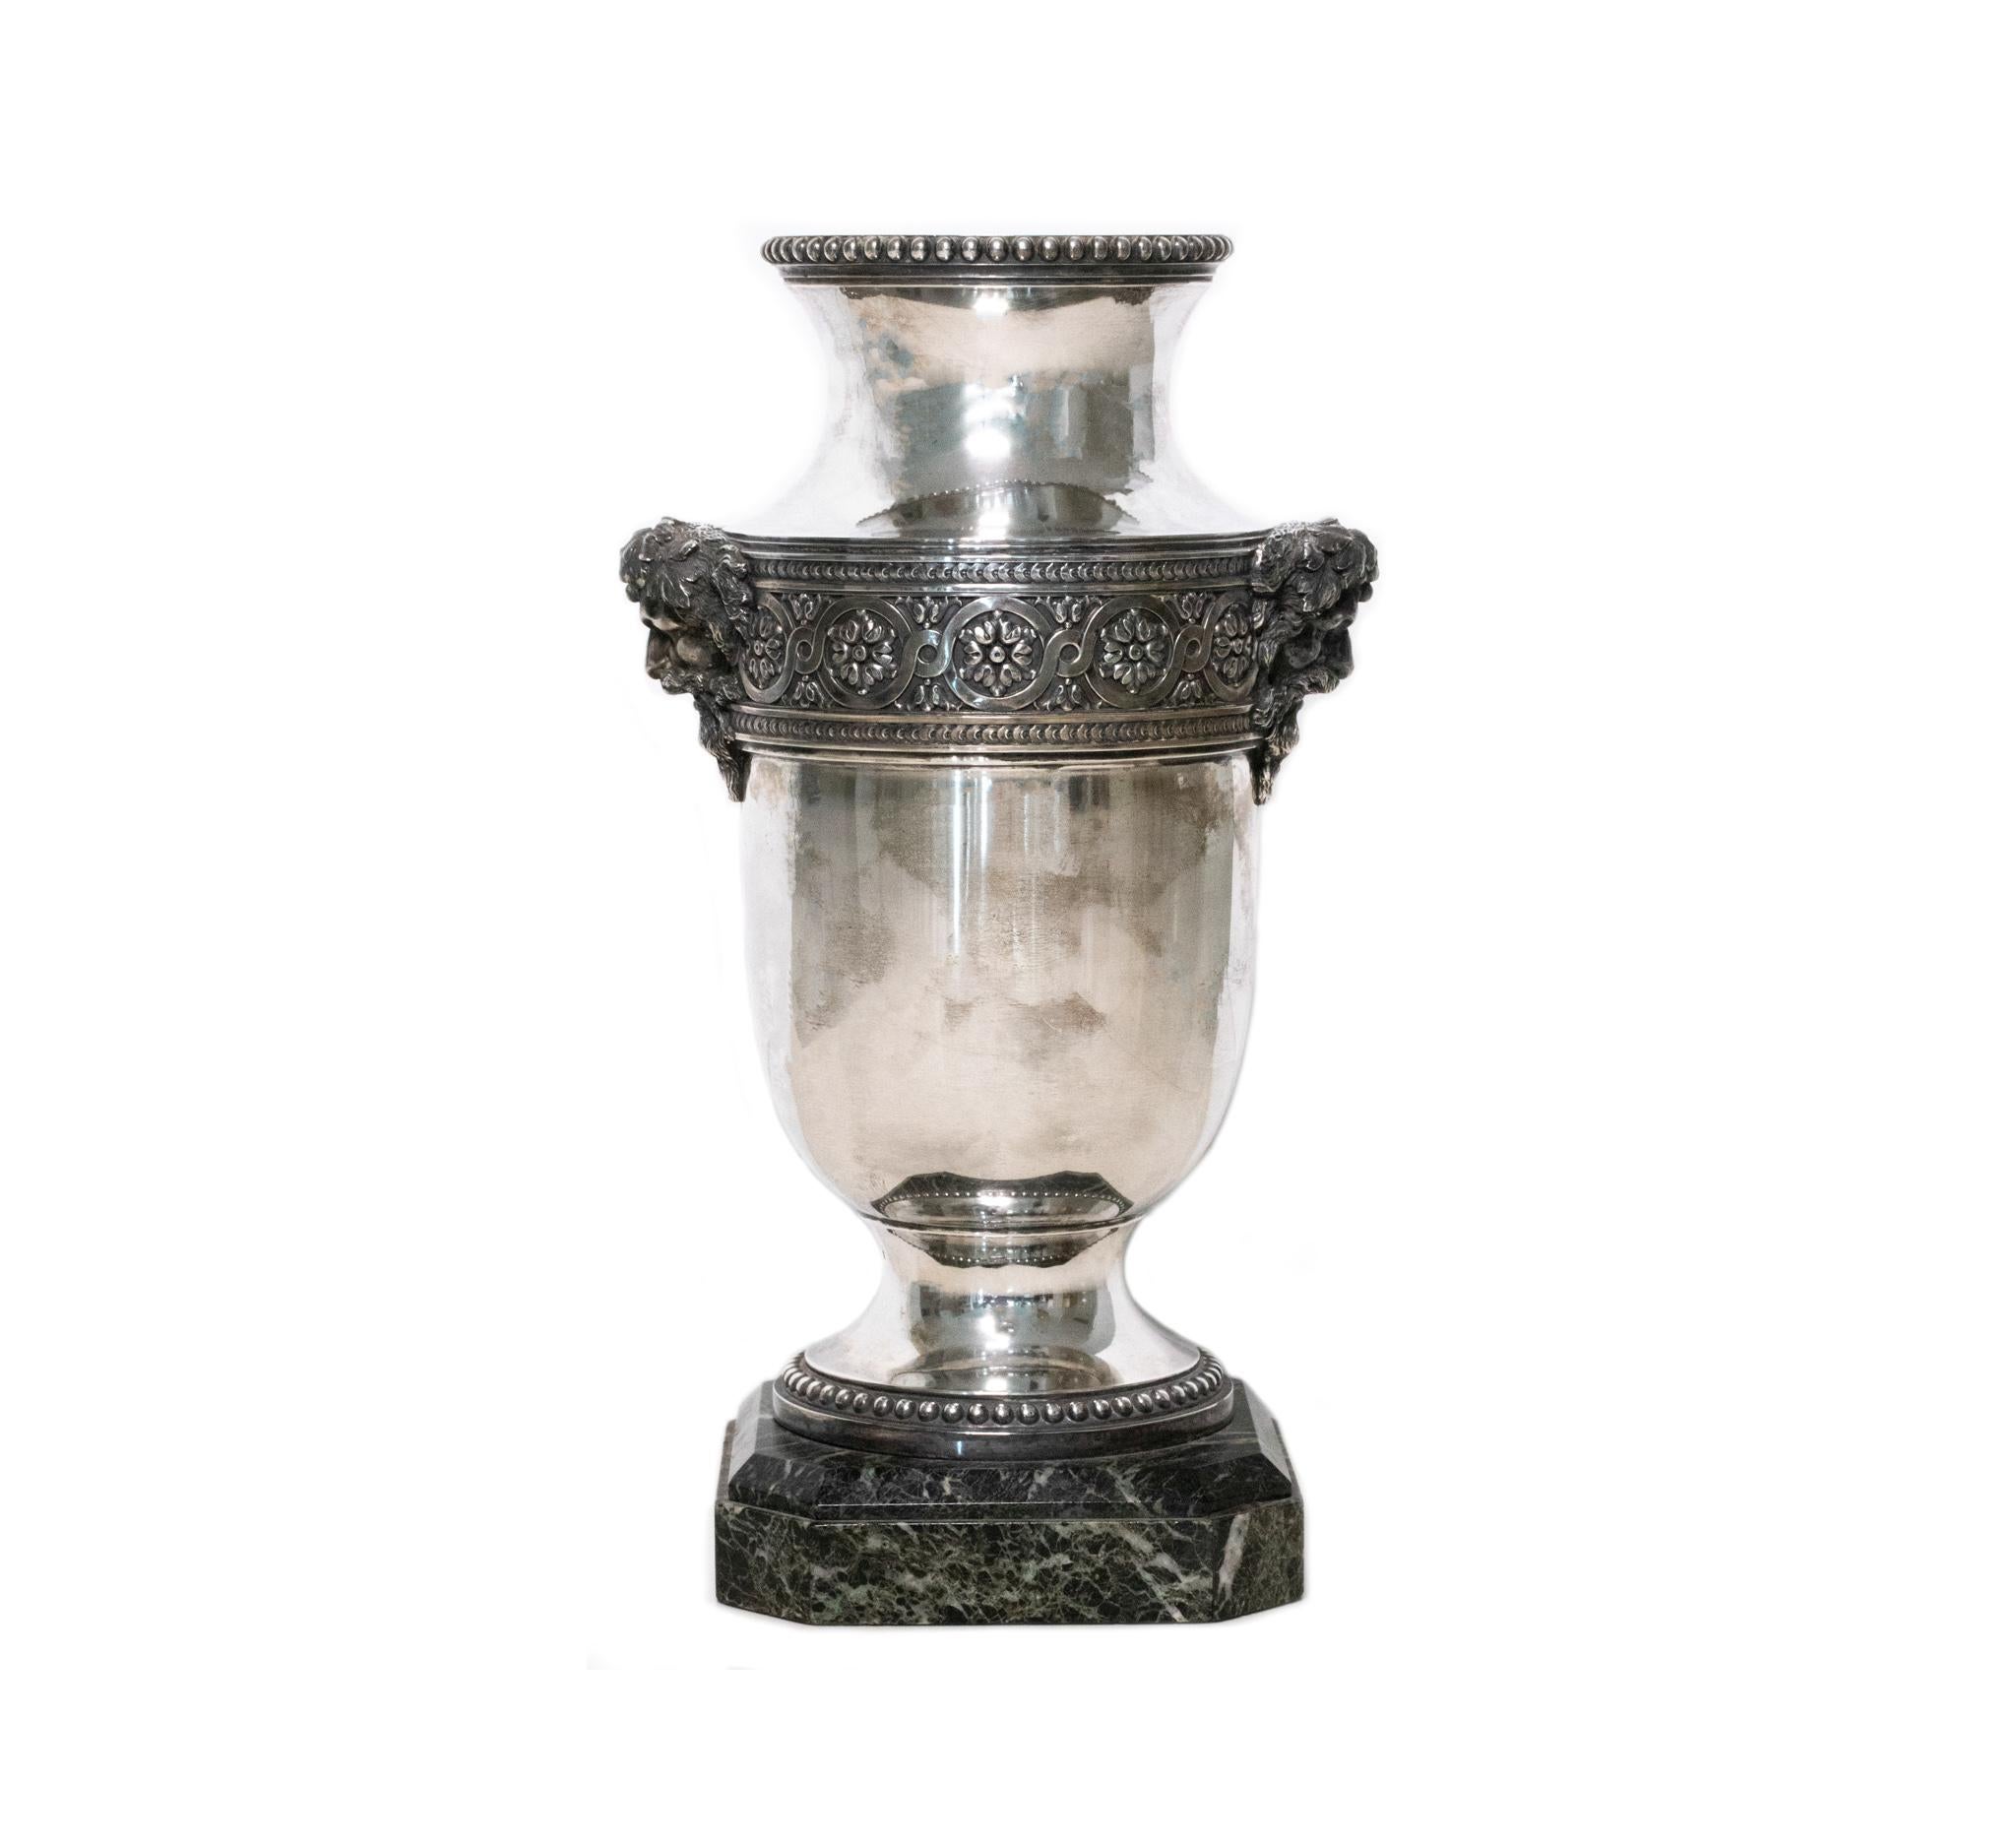 French Ravinet & Co Paris 1912 Louis XVI Neoclassical Urn Vase Bacchus in .950 Silver For Sale